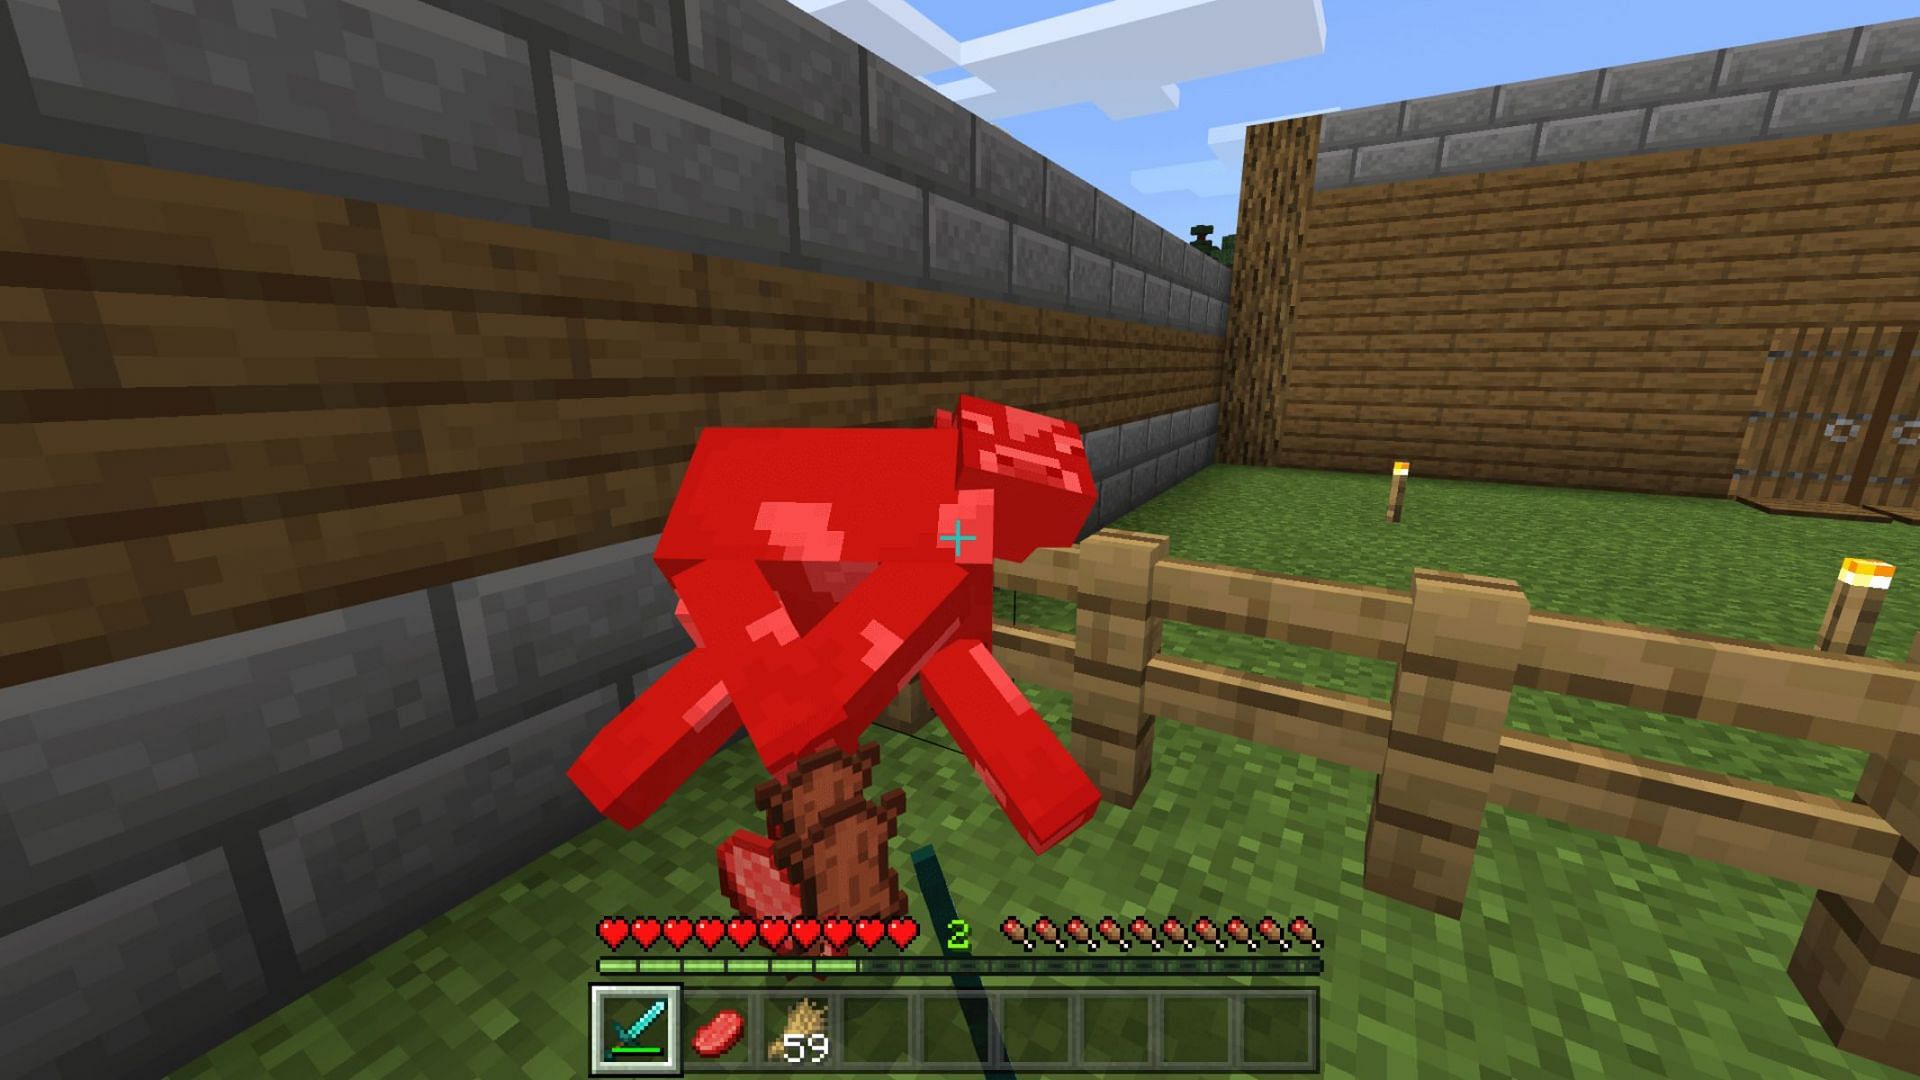 Killing a cow can yield leather in Minecraft (Image via Mojang)